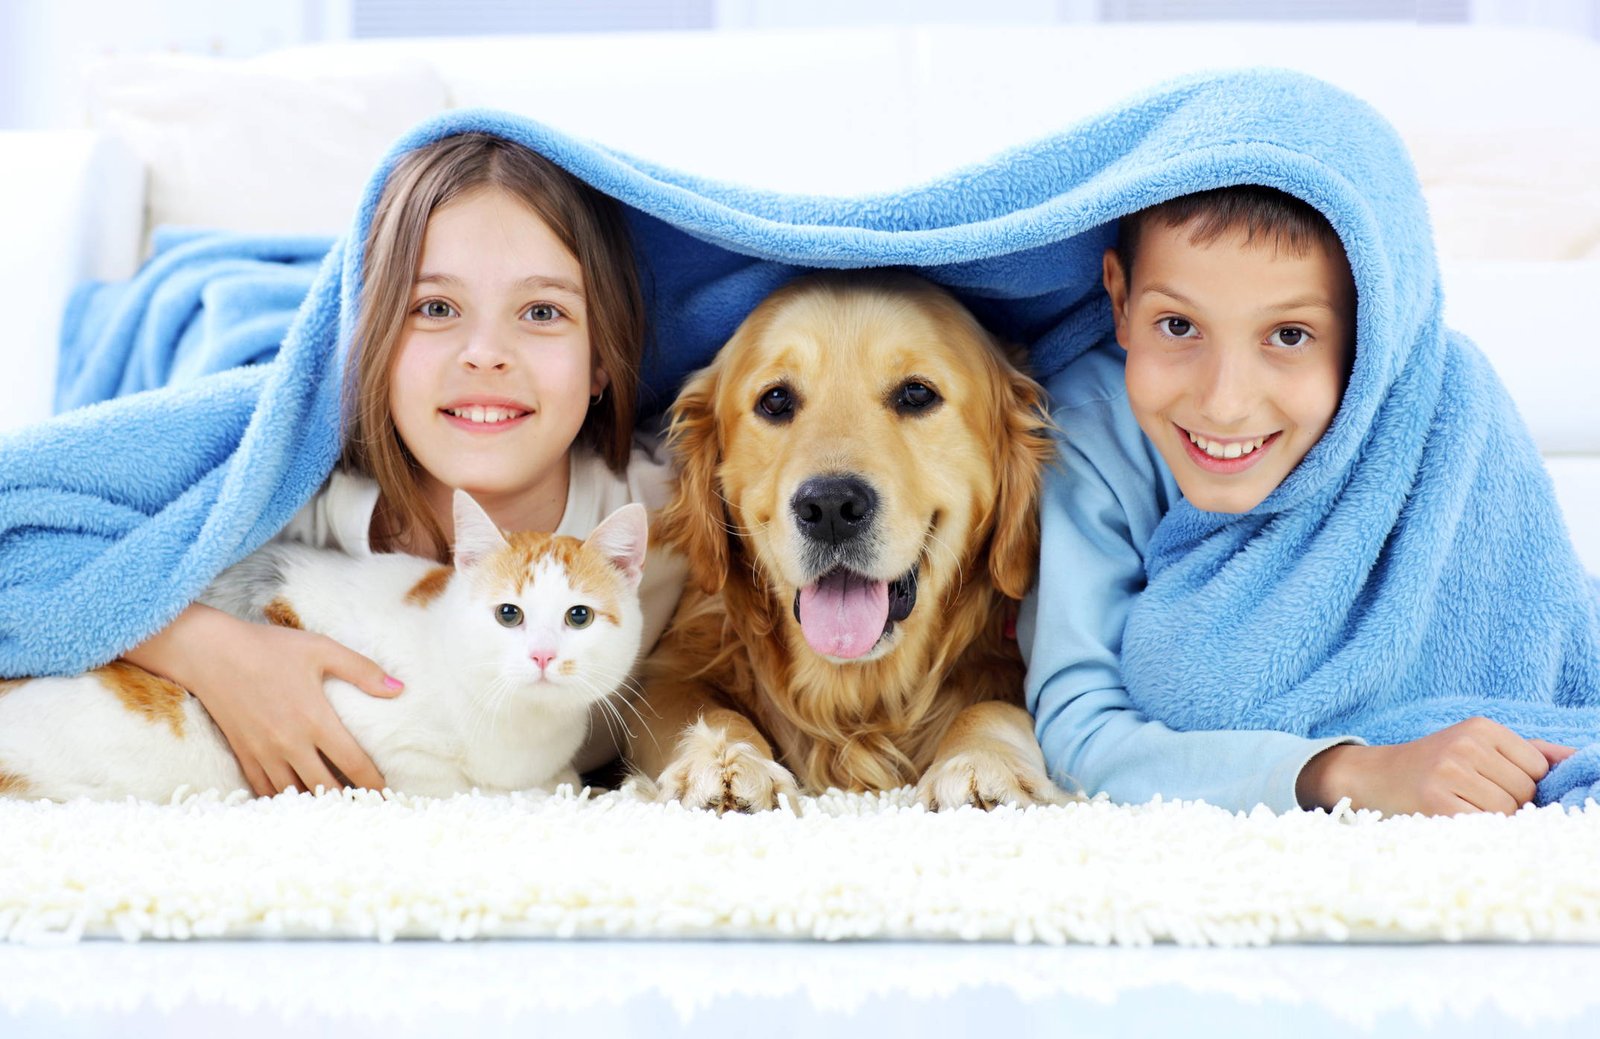 What are Some of the Advantages And Disadvantages of Having a Pet